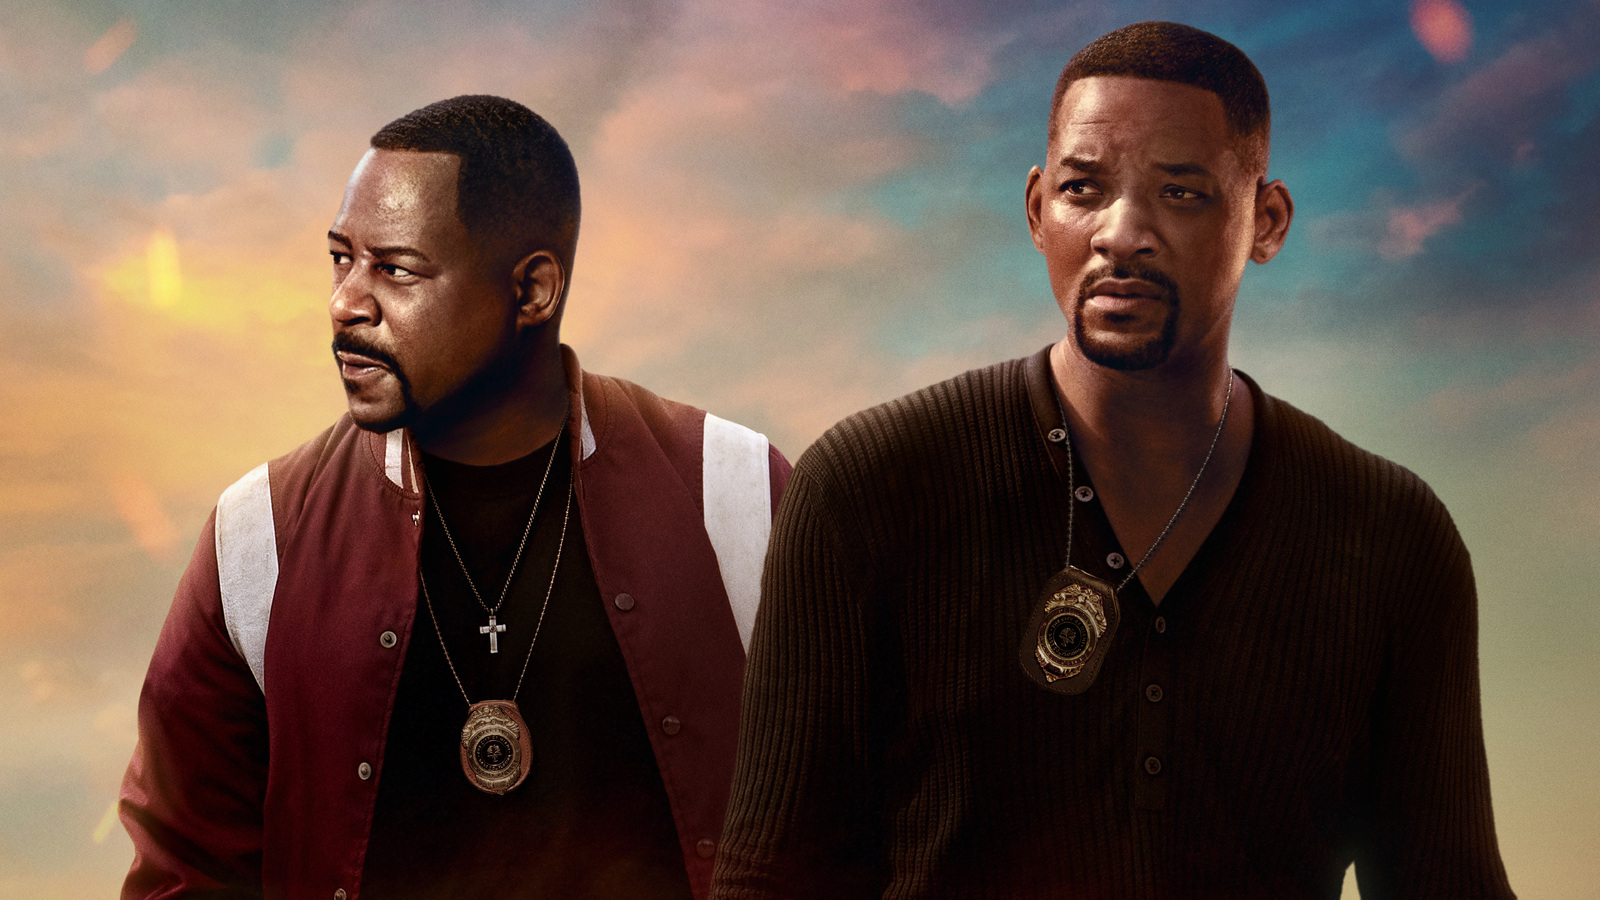 Bad Boys 4: Will Smith and Martin Lawrence together again on the set in Atlanta (PHOTOS)